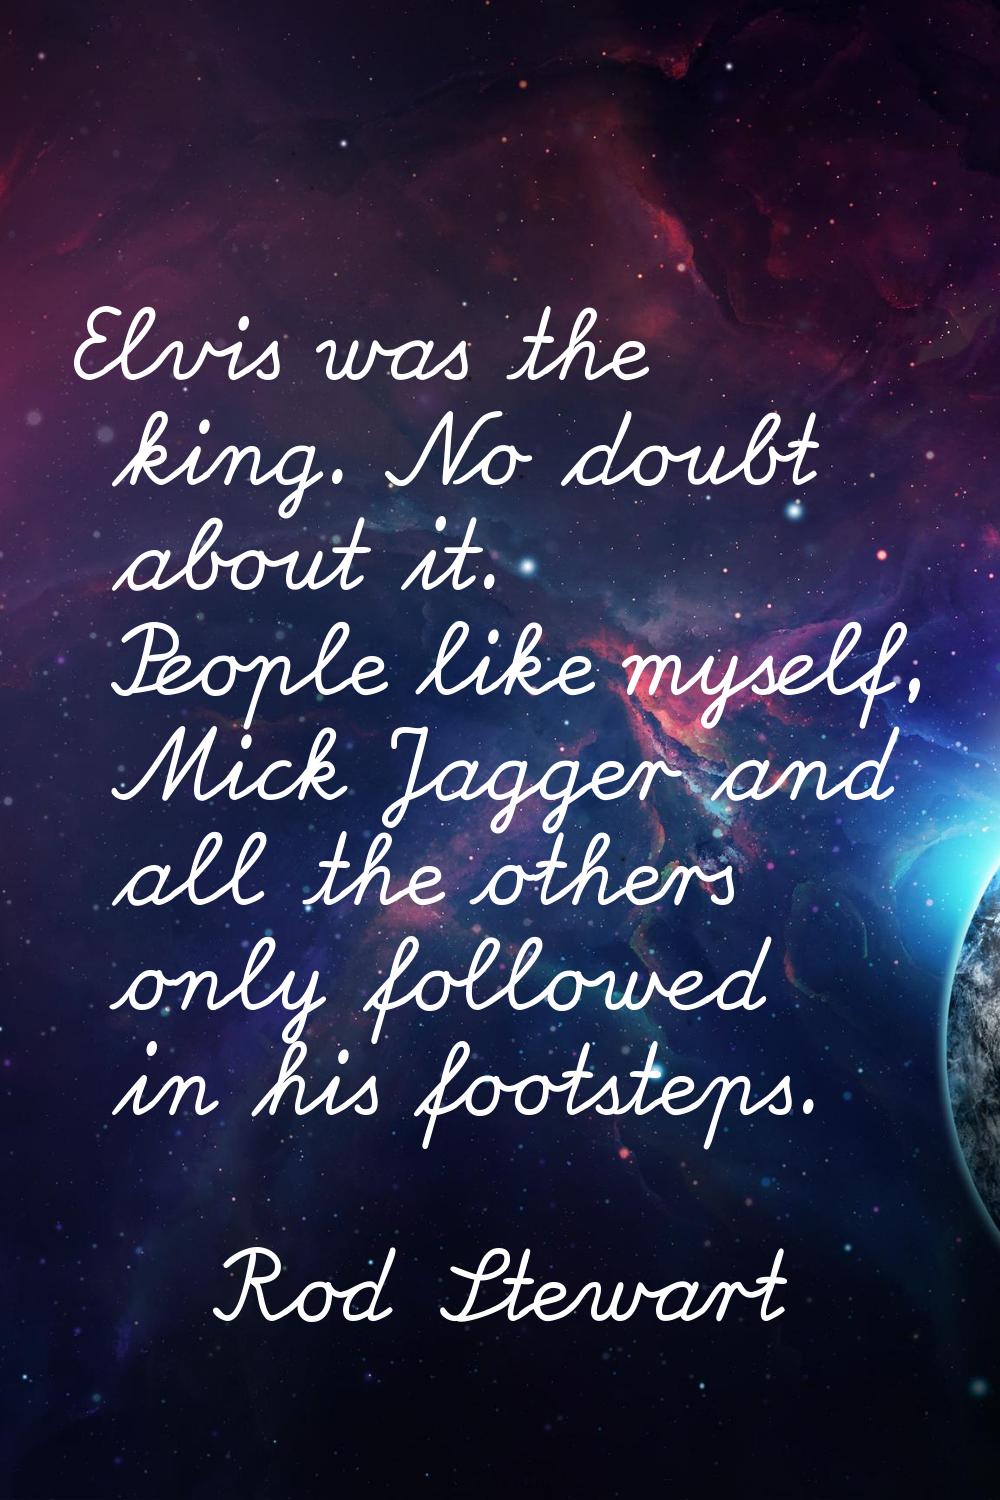 Elvis was the king. No doubt about it. People like myself, Mick Jagger and all the others only foll